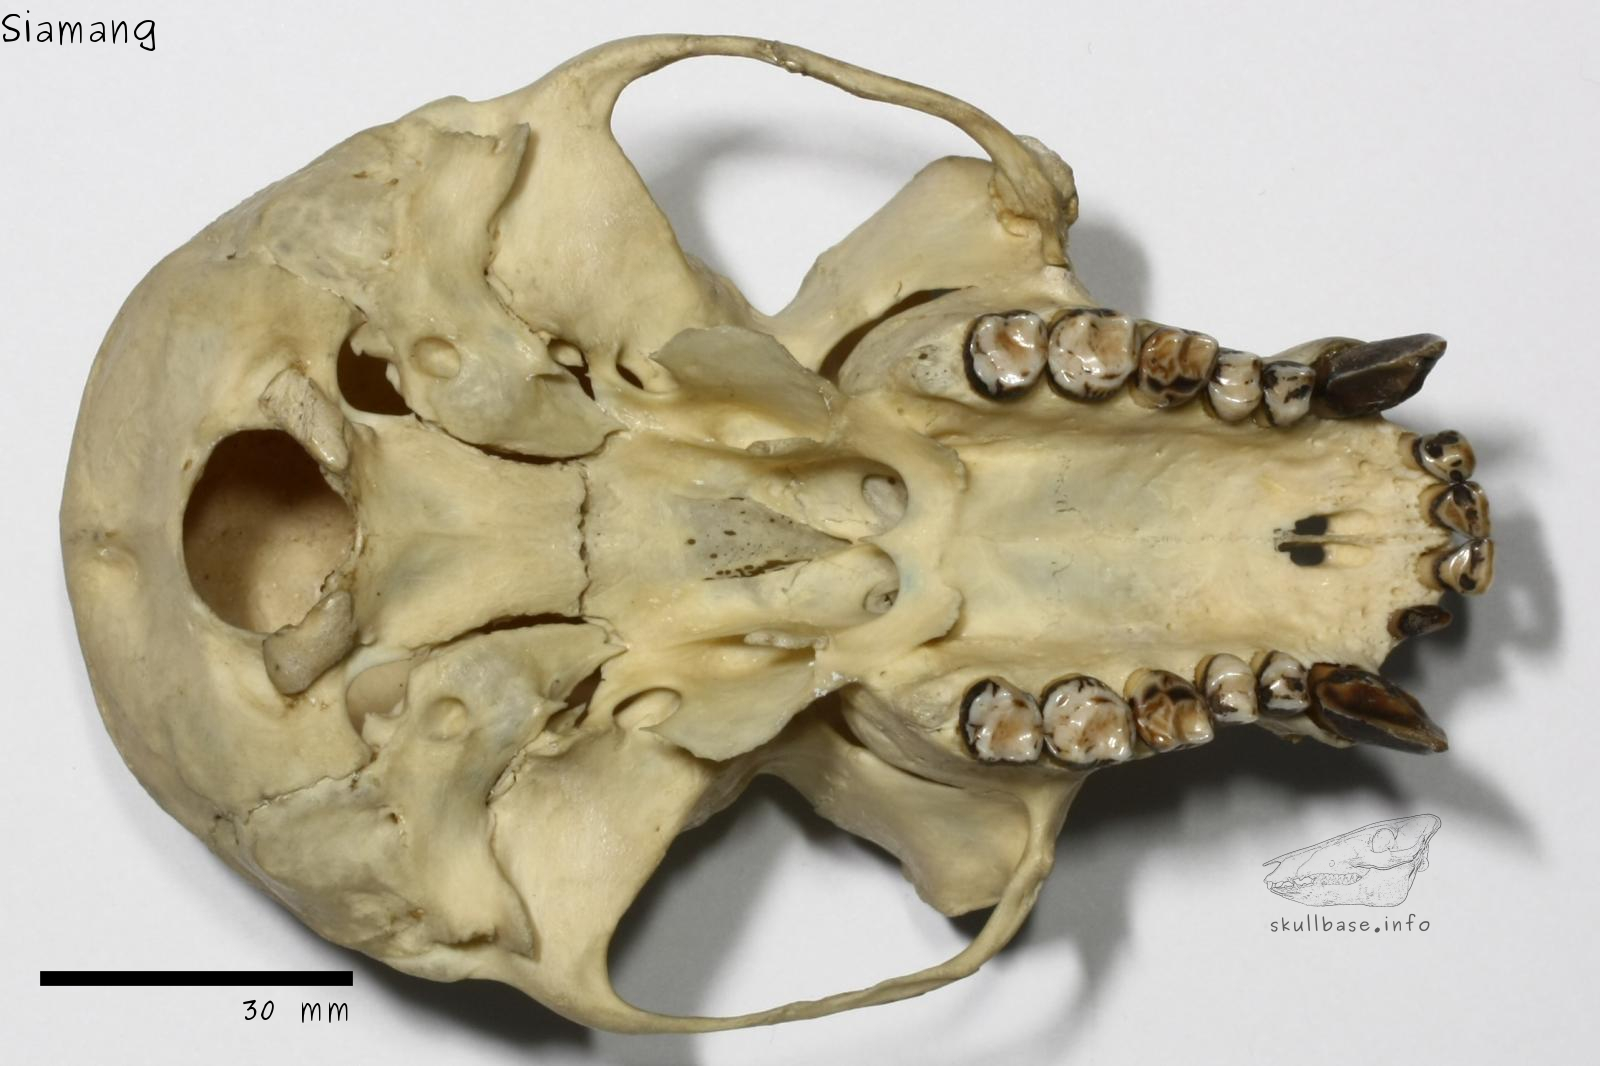 Siamang (Symphalangus syndactylus) skull ventral view